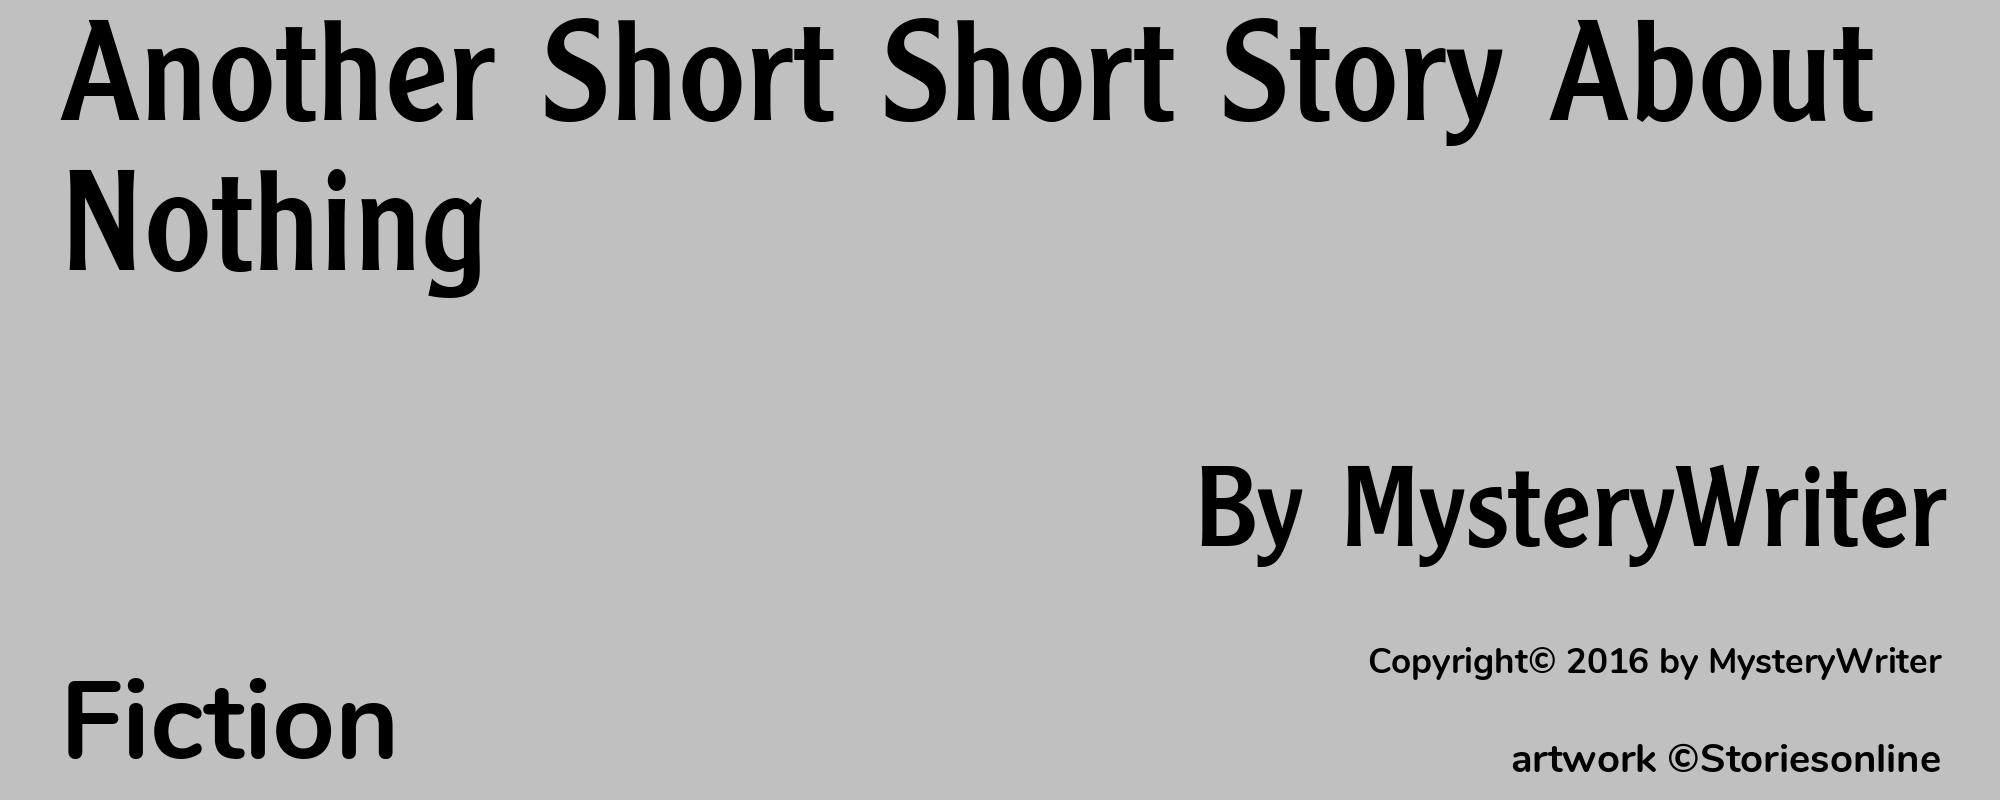 Another Short Short Story About Nothing - Cover